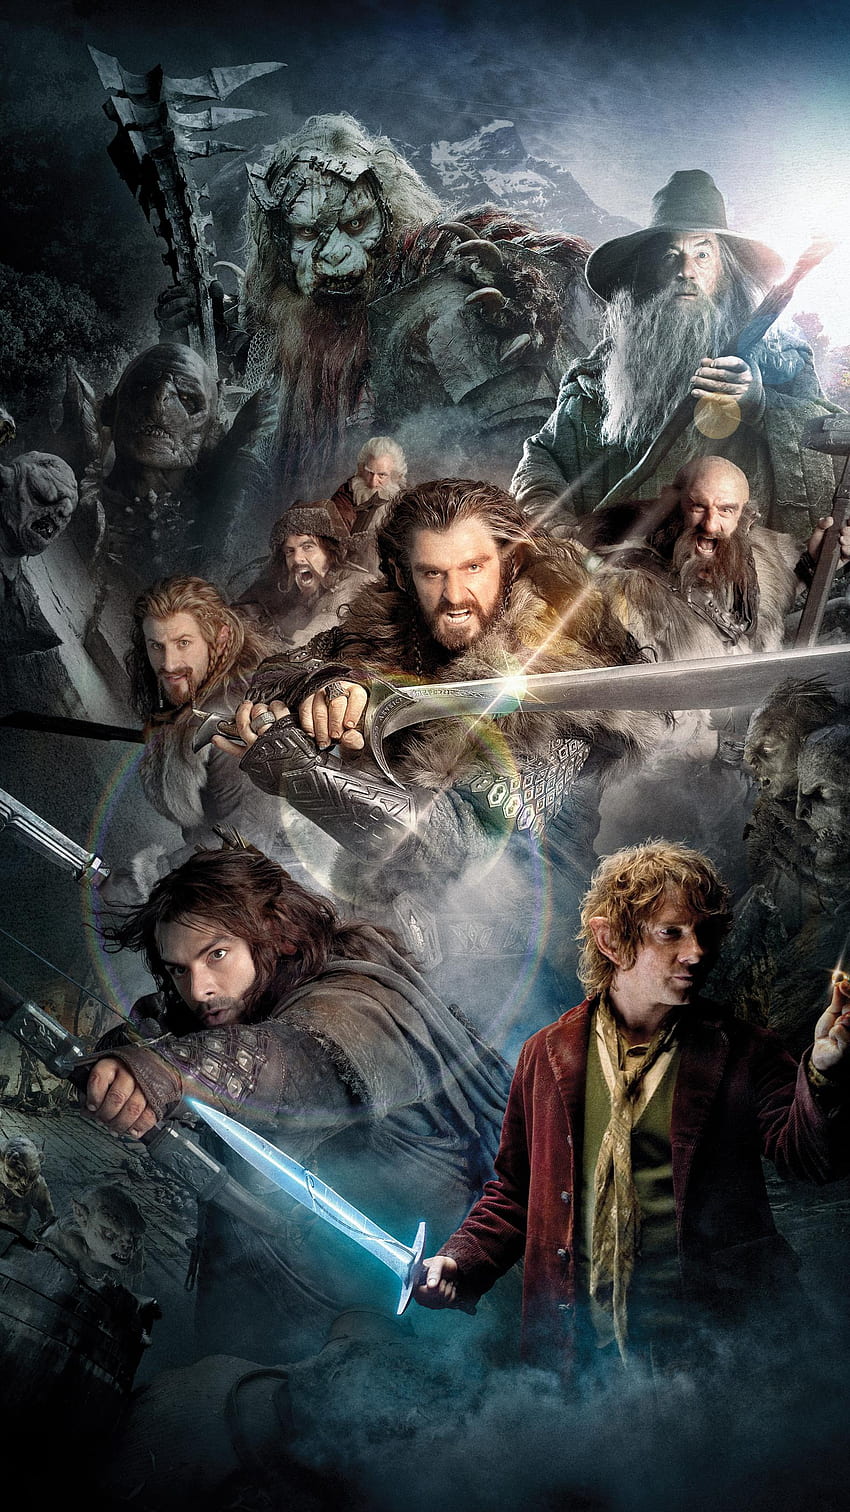 The Hobbit: An Unexpected Journey (2022) movie HD phone wallpaper